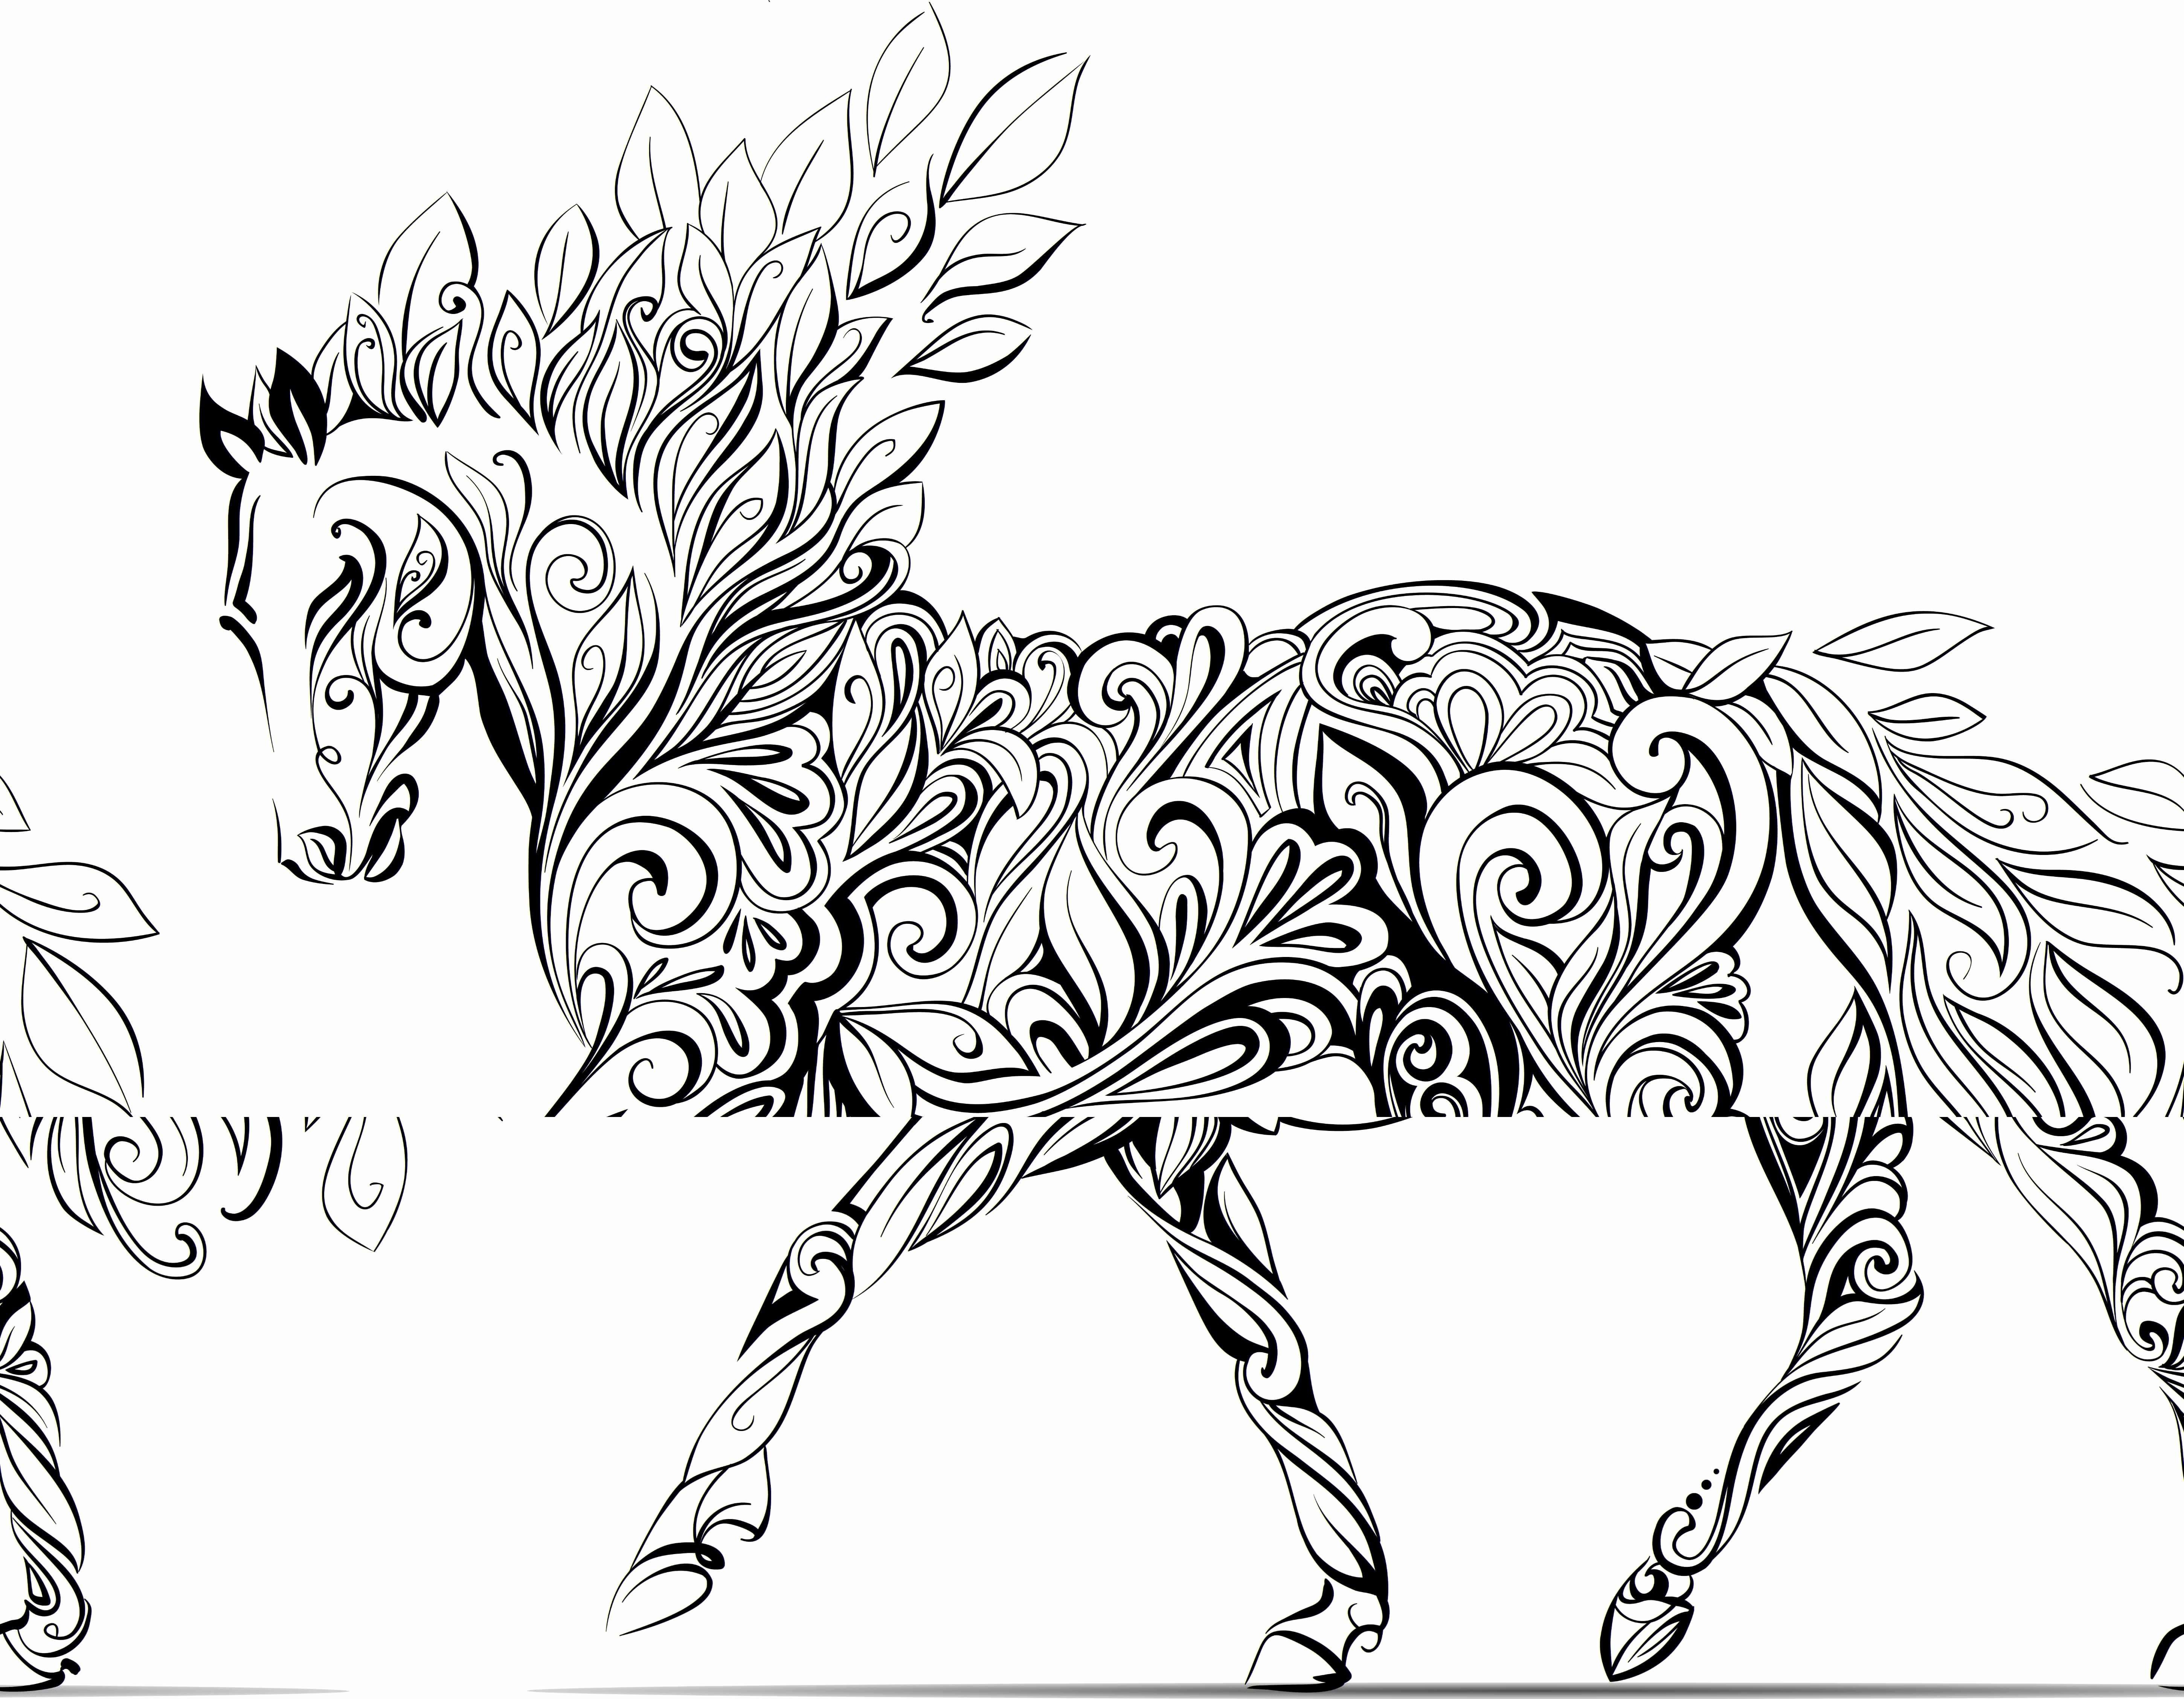 unicorn-coloring-pages-for-girls-of-unicorn-coloring-pages-for-girls Unicorn Coloring Pages for Girls Animal 